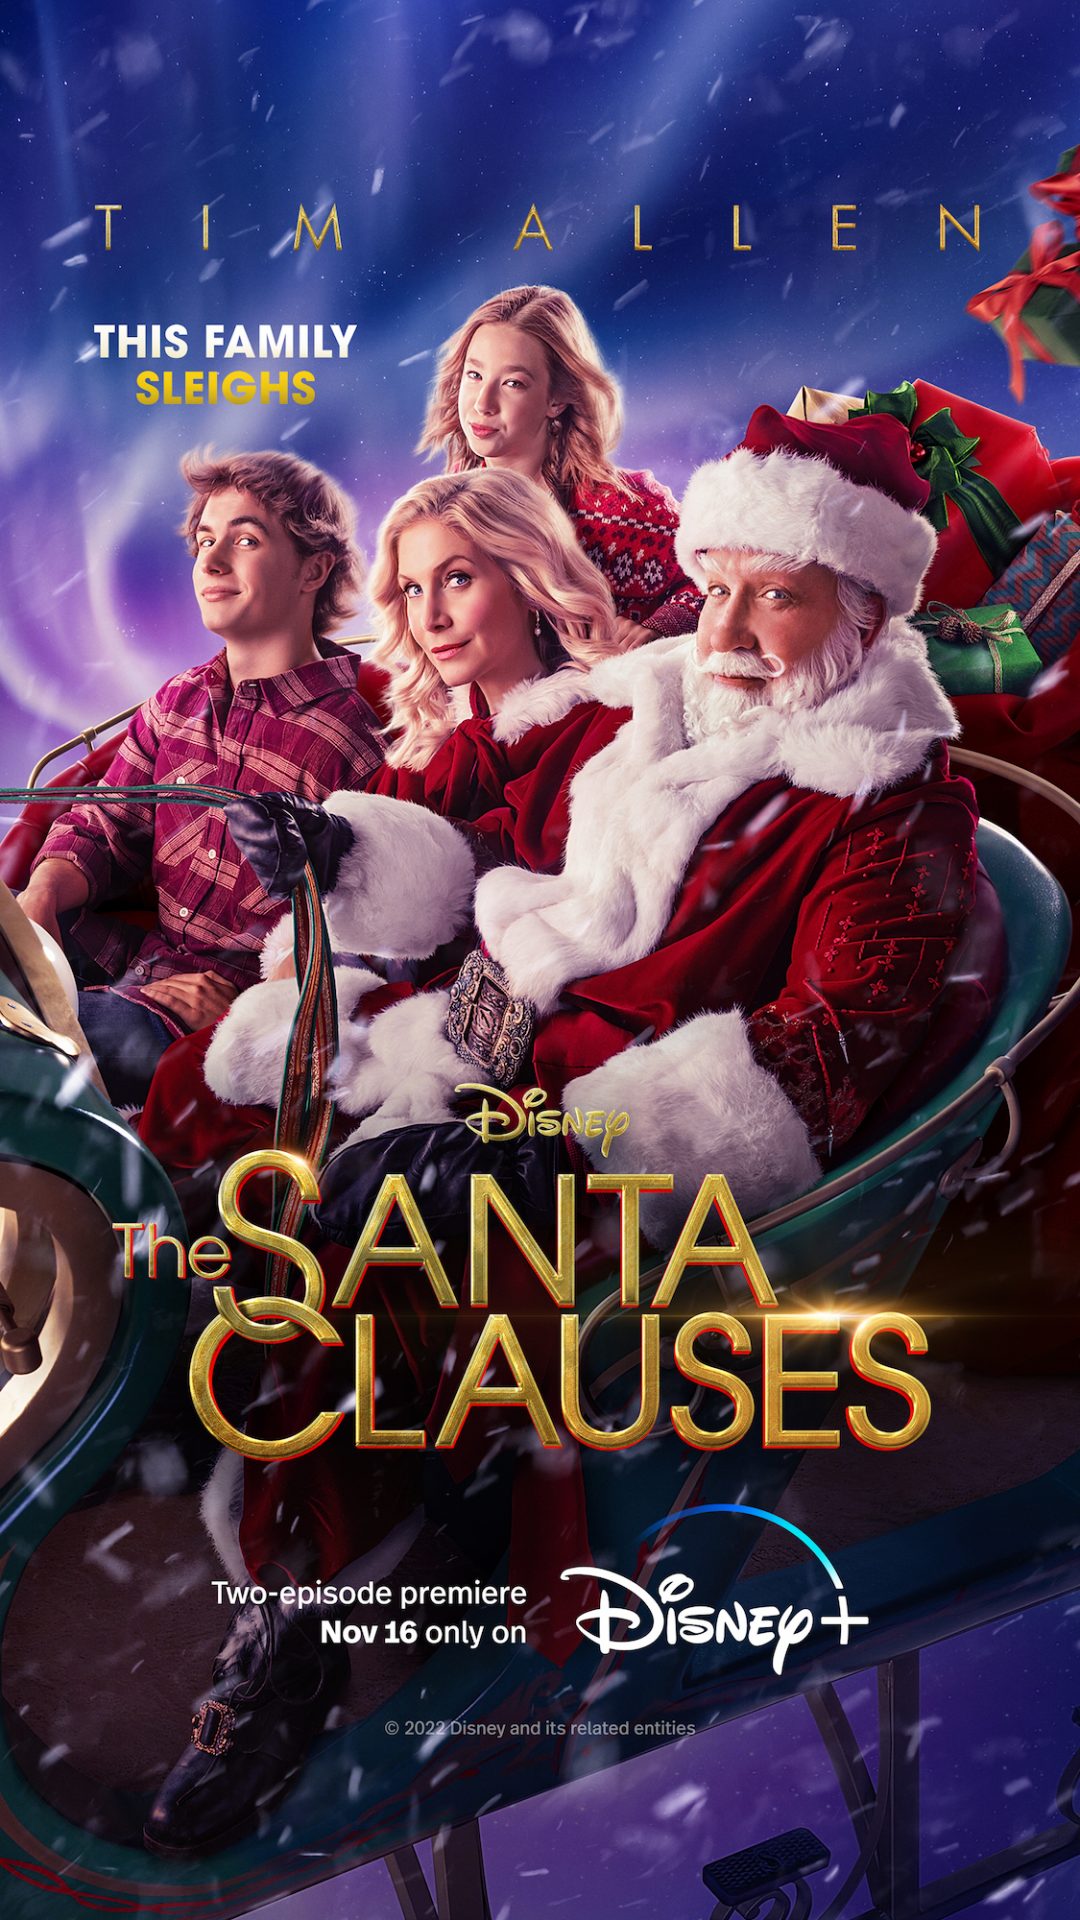 The Claus family in a sleigh on the poster for The Santa Clauses